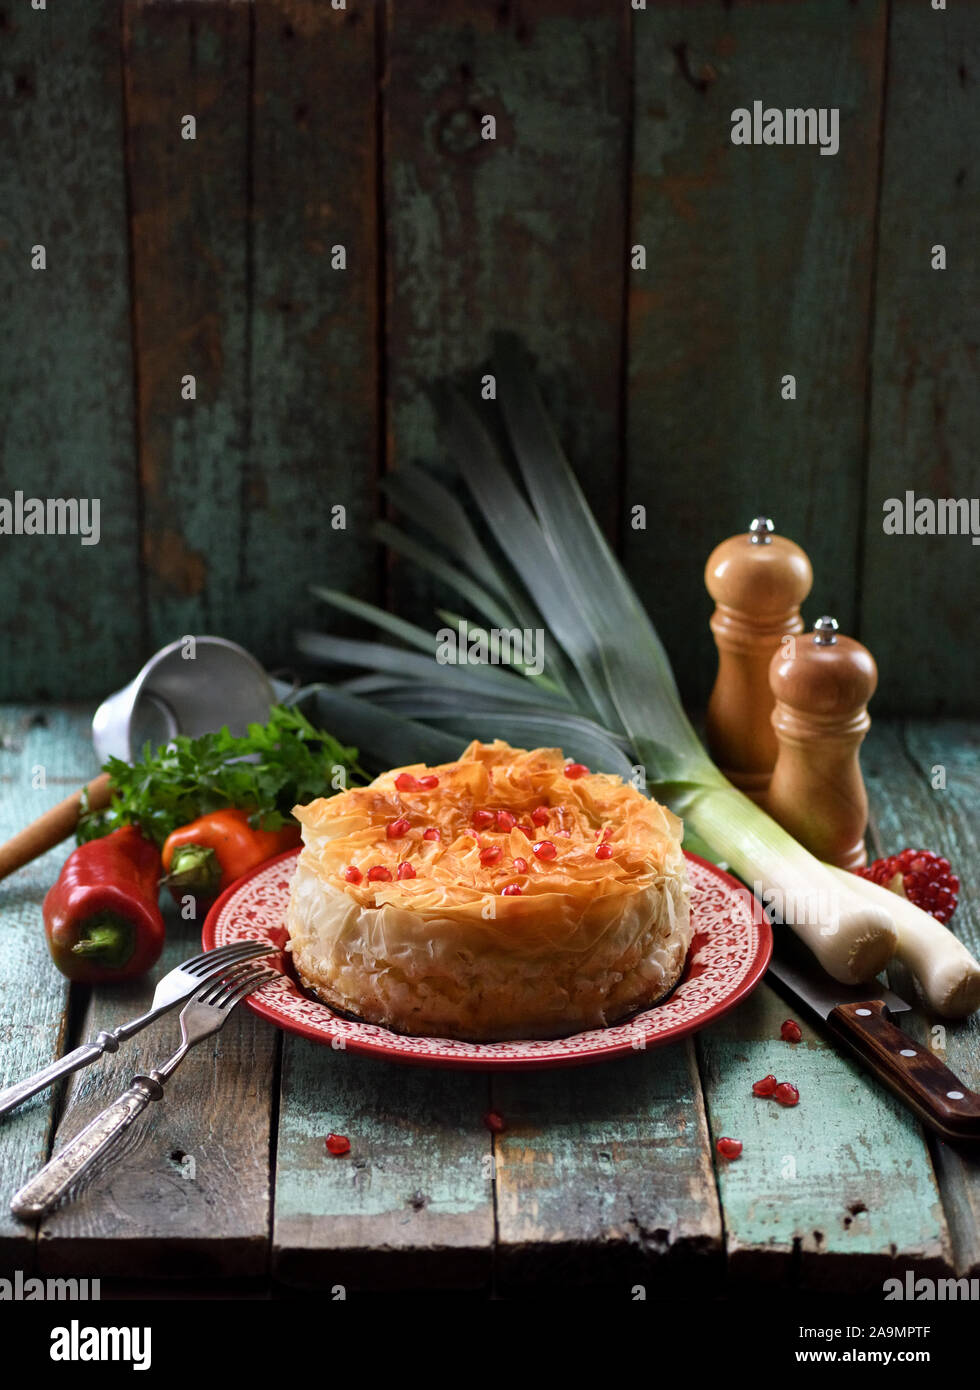 Homemade filo dough pie with raw vegetables and pomegranate seeds on red plate on blue shabby background copy space. Low key still life with natural l Stock Photo